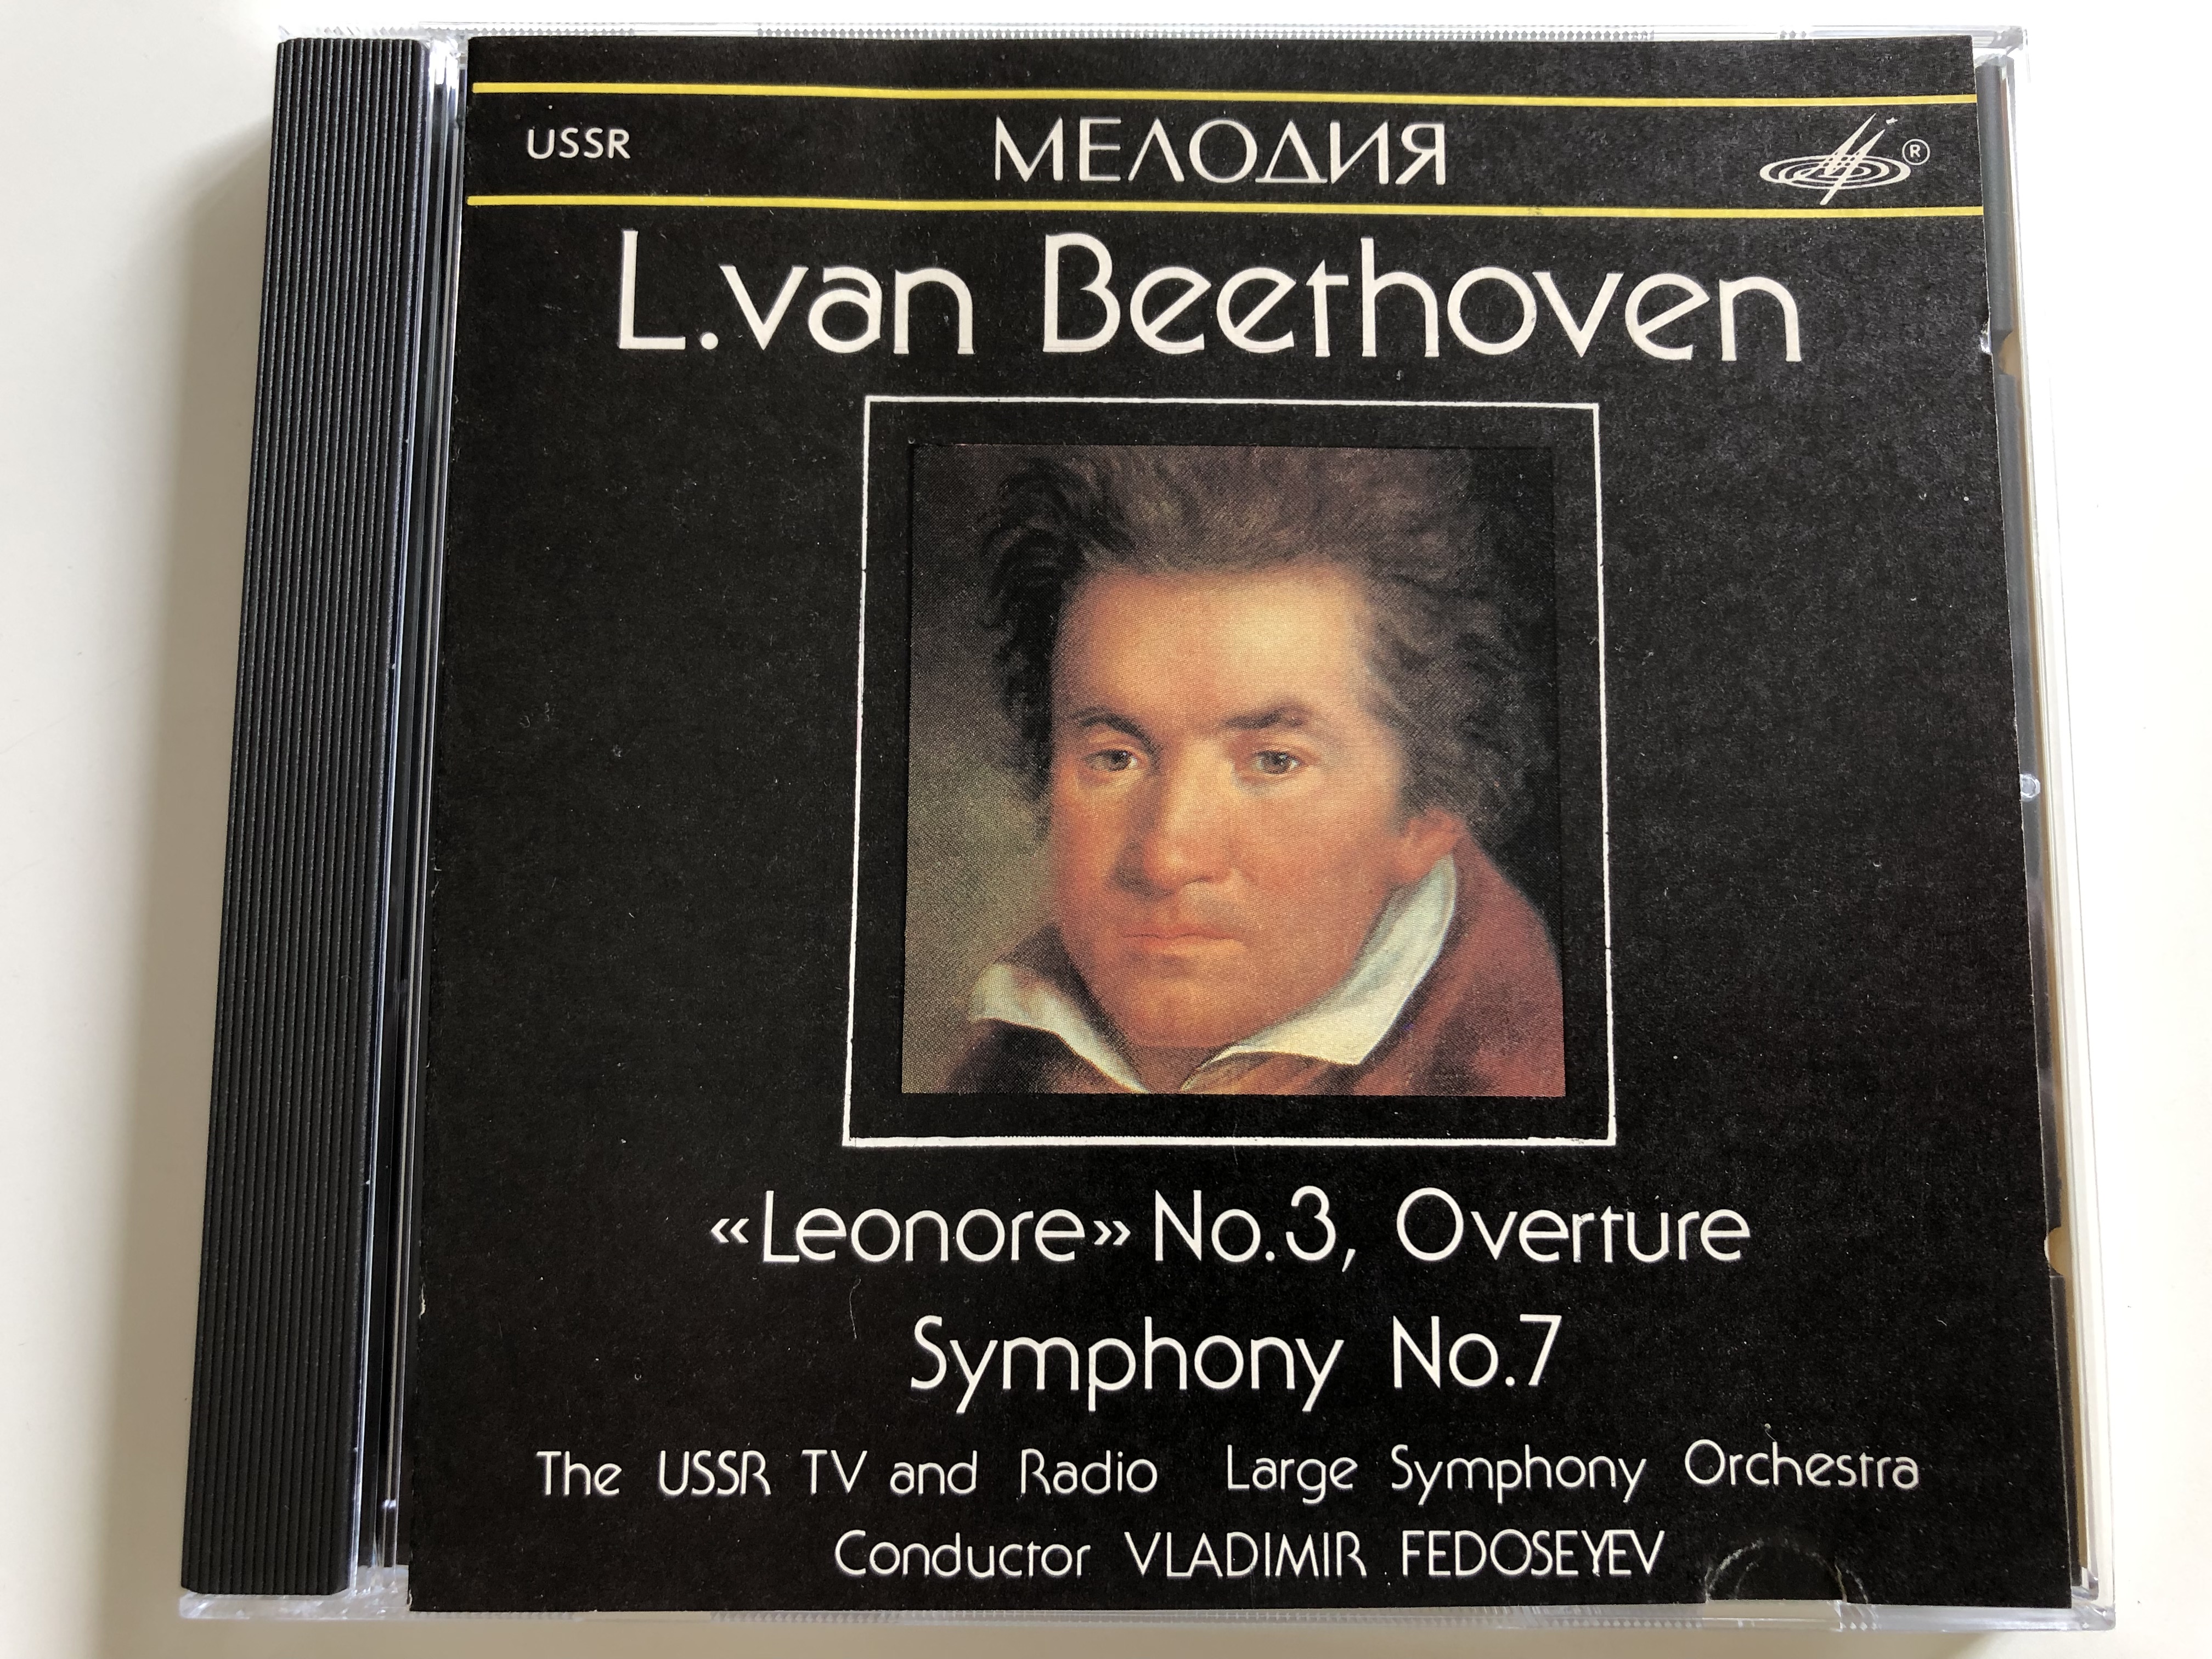 l.-van-beethoven-leonore-no.-3-overture-symphony-no.-7-the-ussr-tv-and-radio-large-symphony-orchestra-conductor-vladimir-fedoseyev-melodiya-audio-cd-1988-1-.jpg